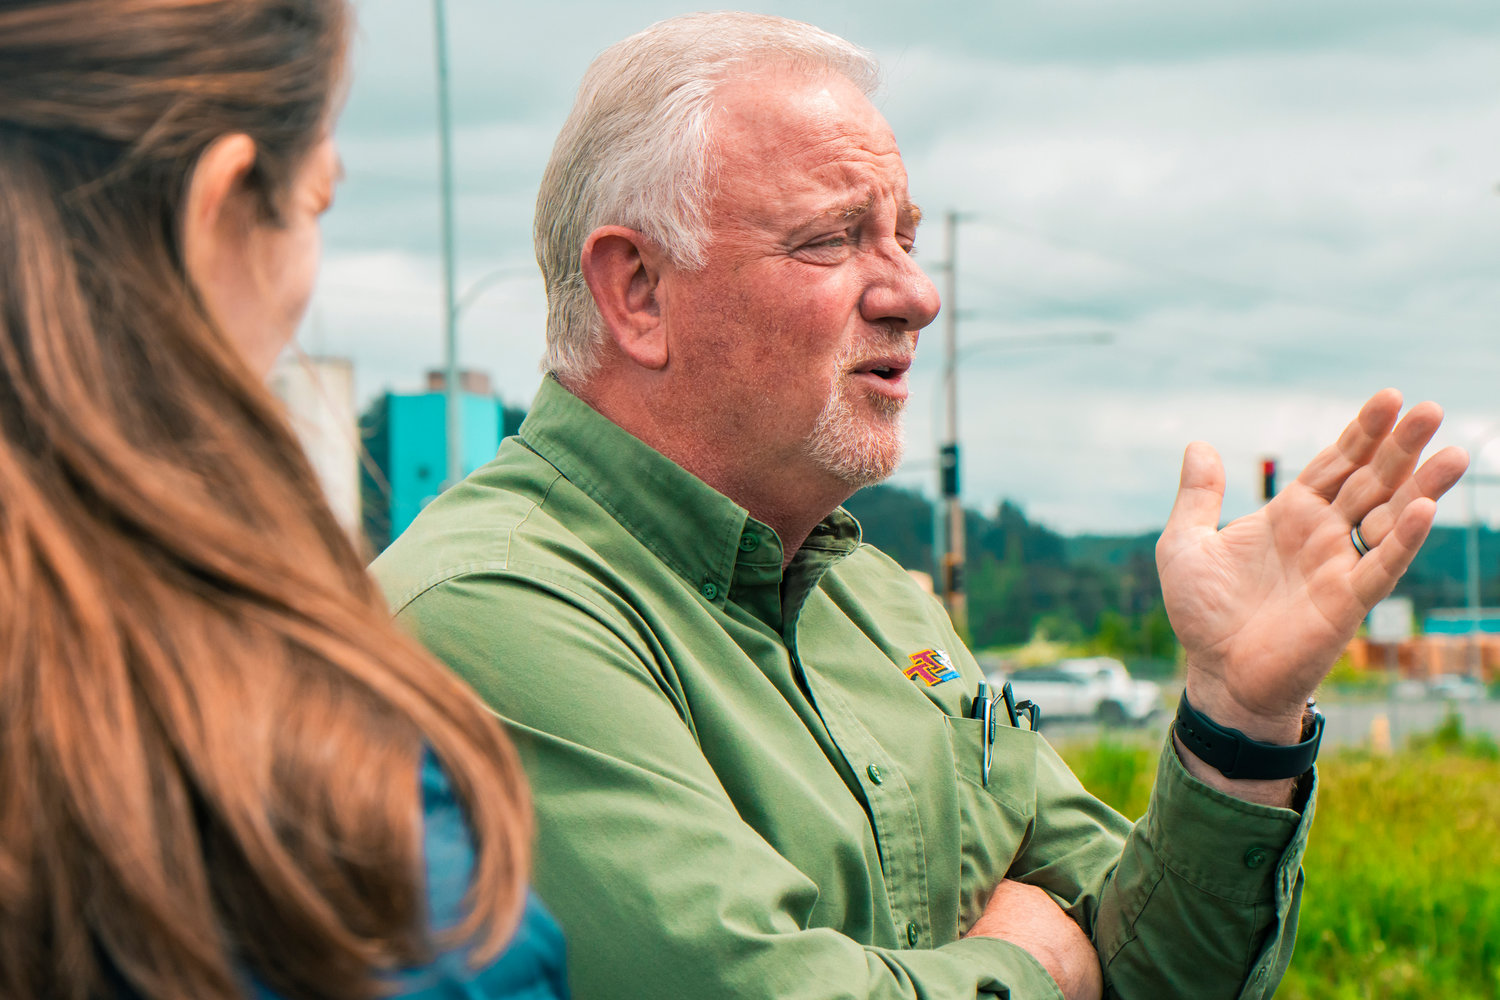 Twin Transit Executive Director Joe Clark discusses plans for a new hydrogen fueling station station near the Bishop Road Twin Transit office in Chehalis.